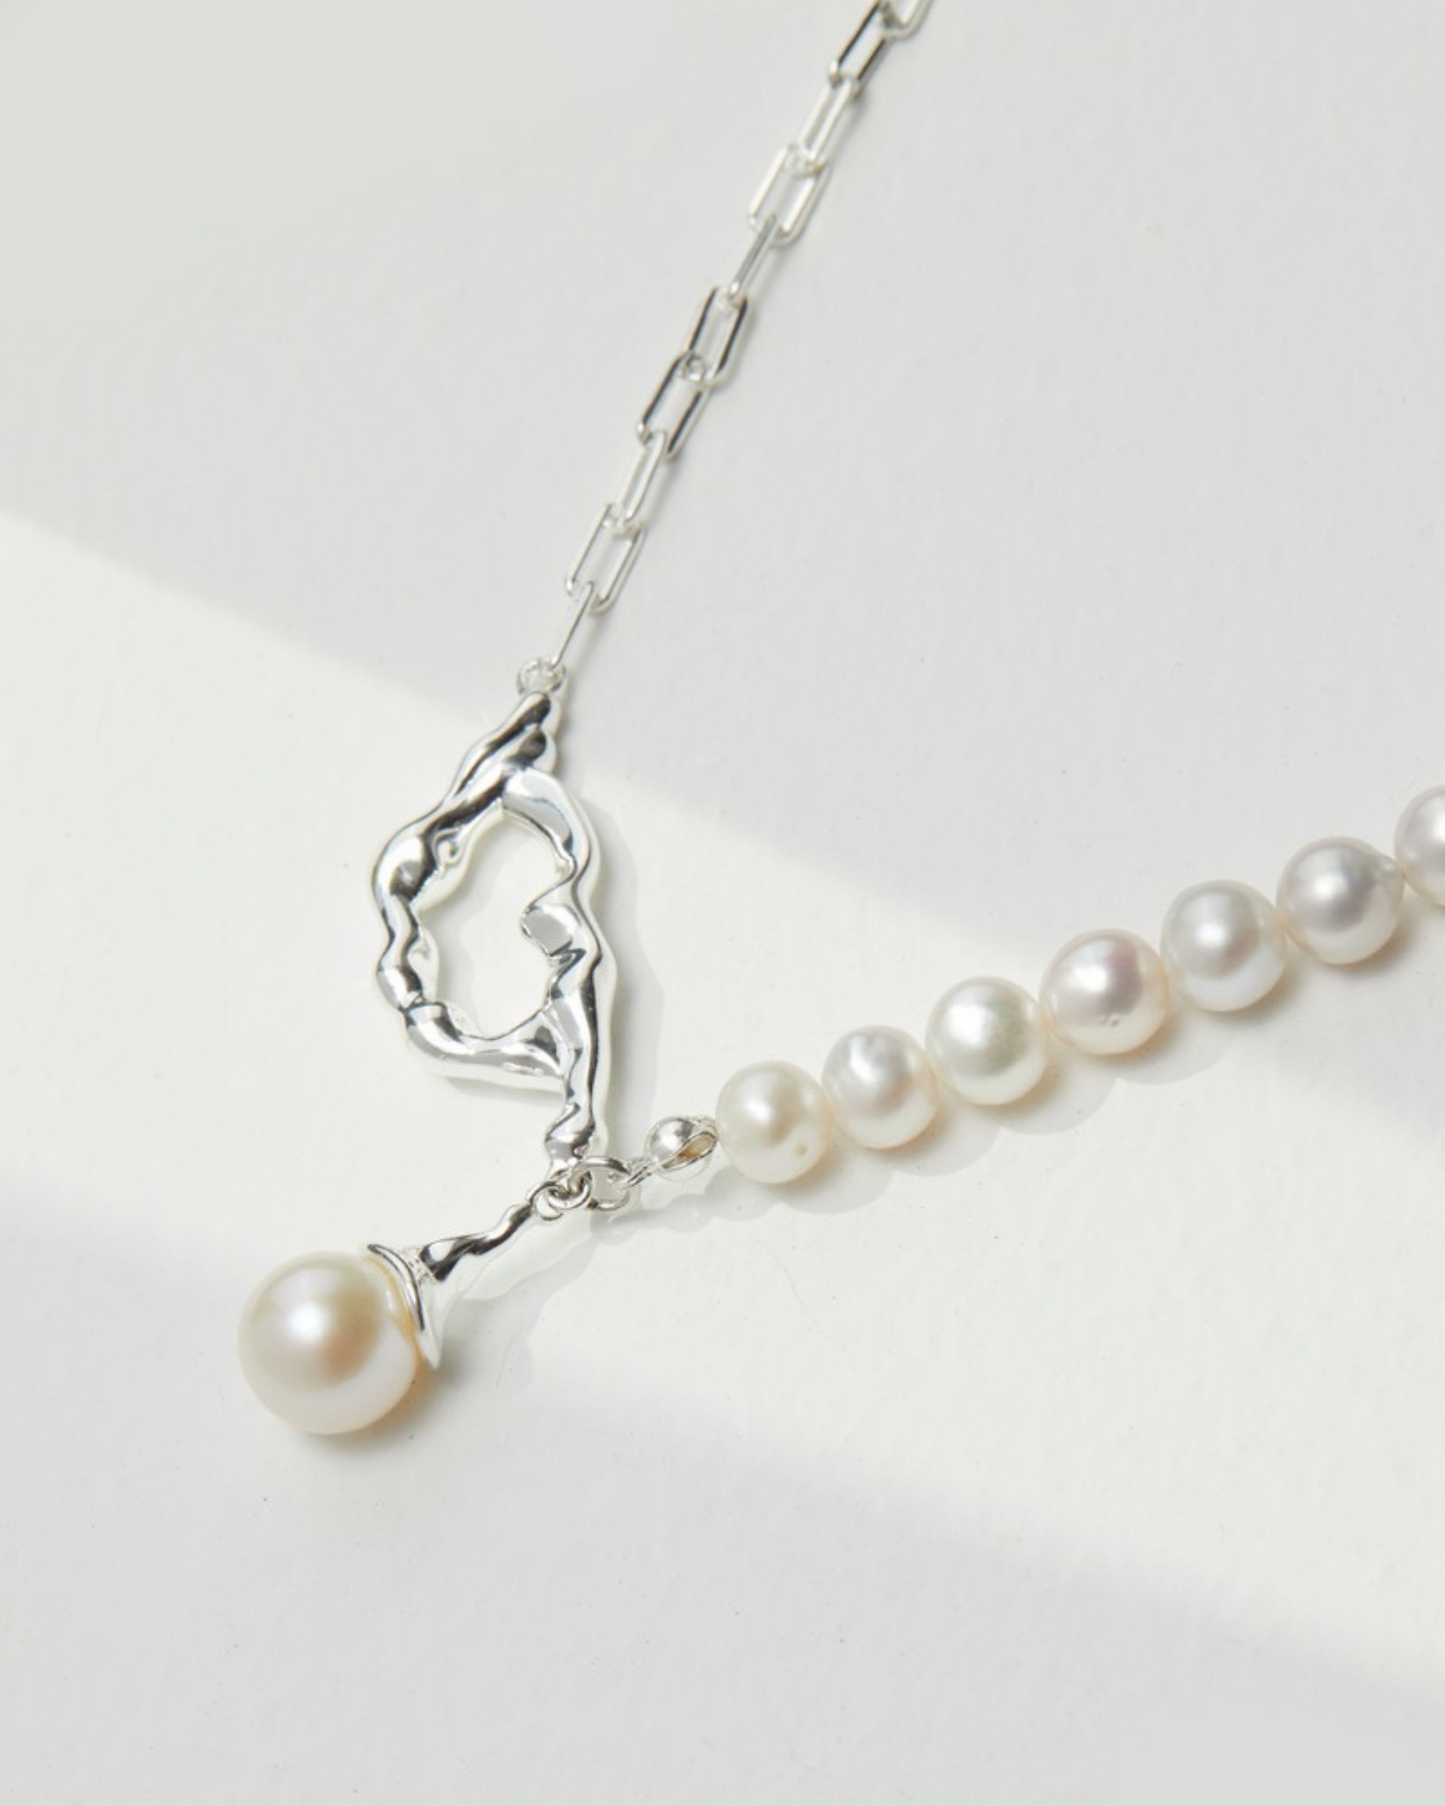 Silver and Pearl Pendant Necklace